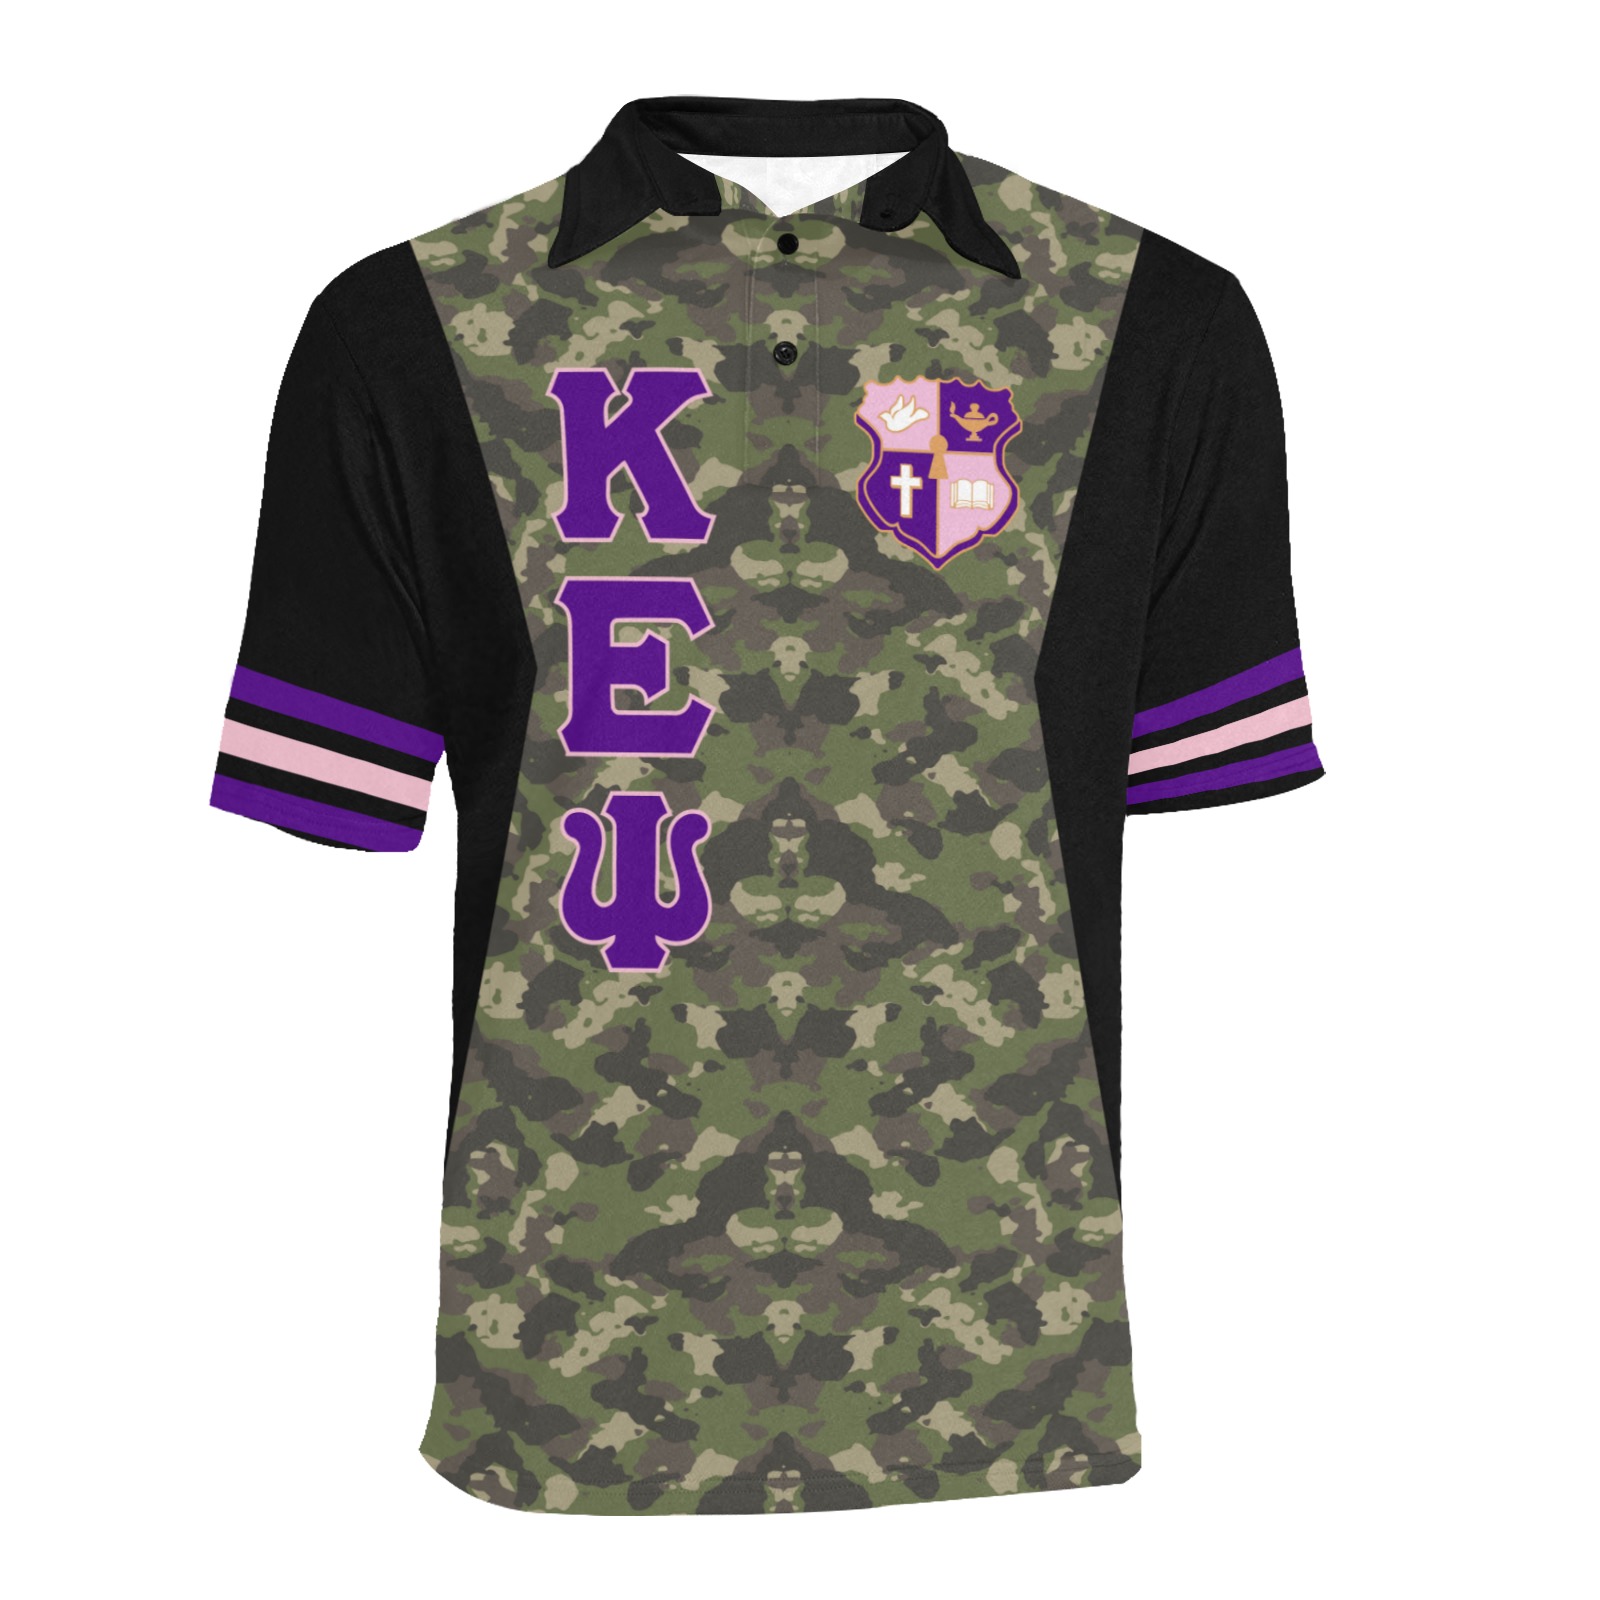 Camo pattern polo shirt with purple accents and emblem.